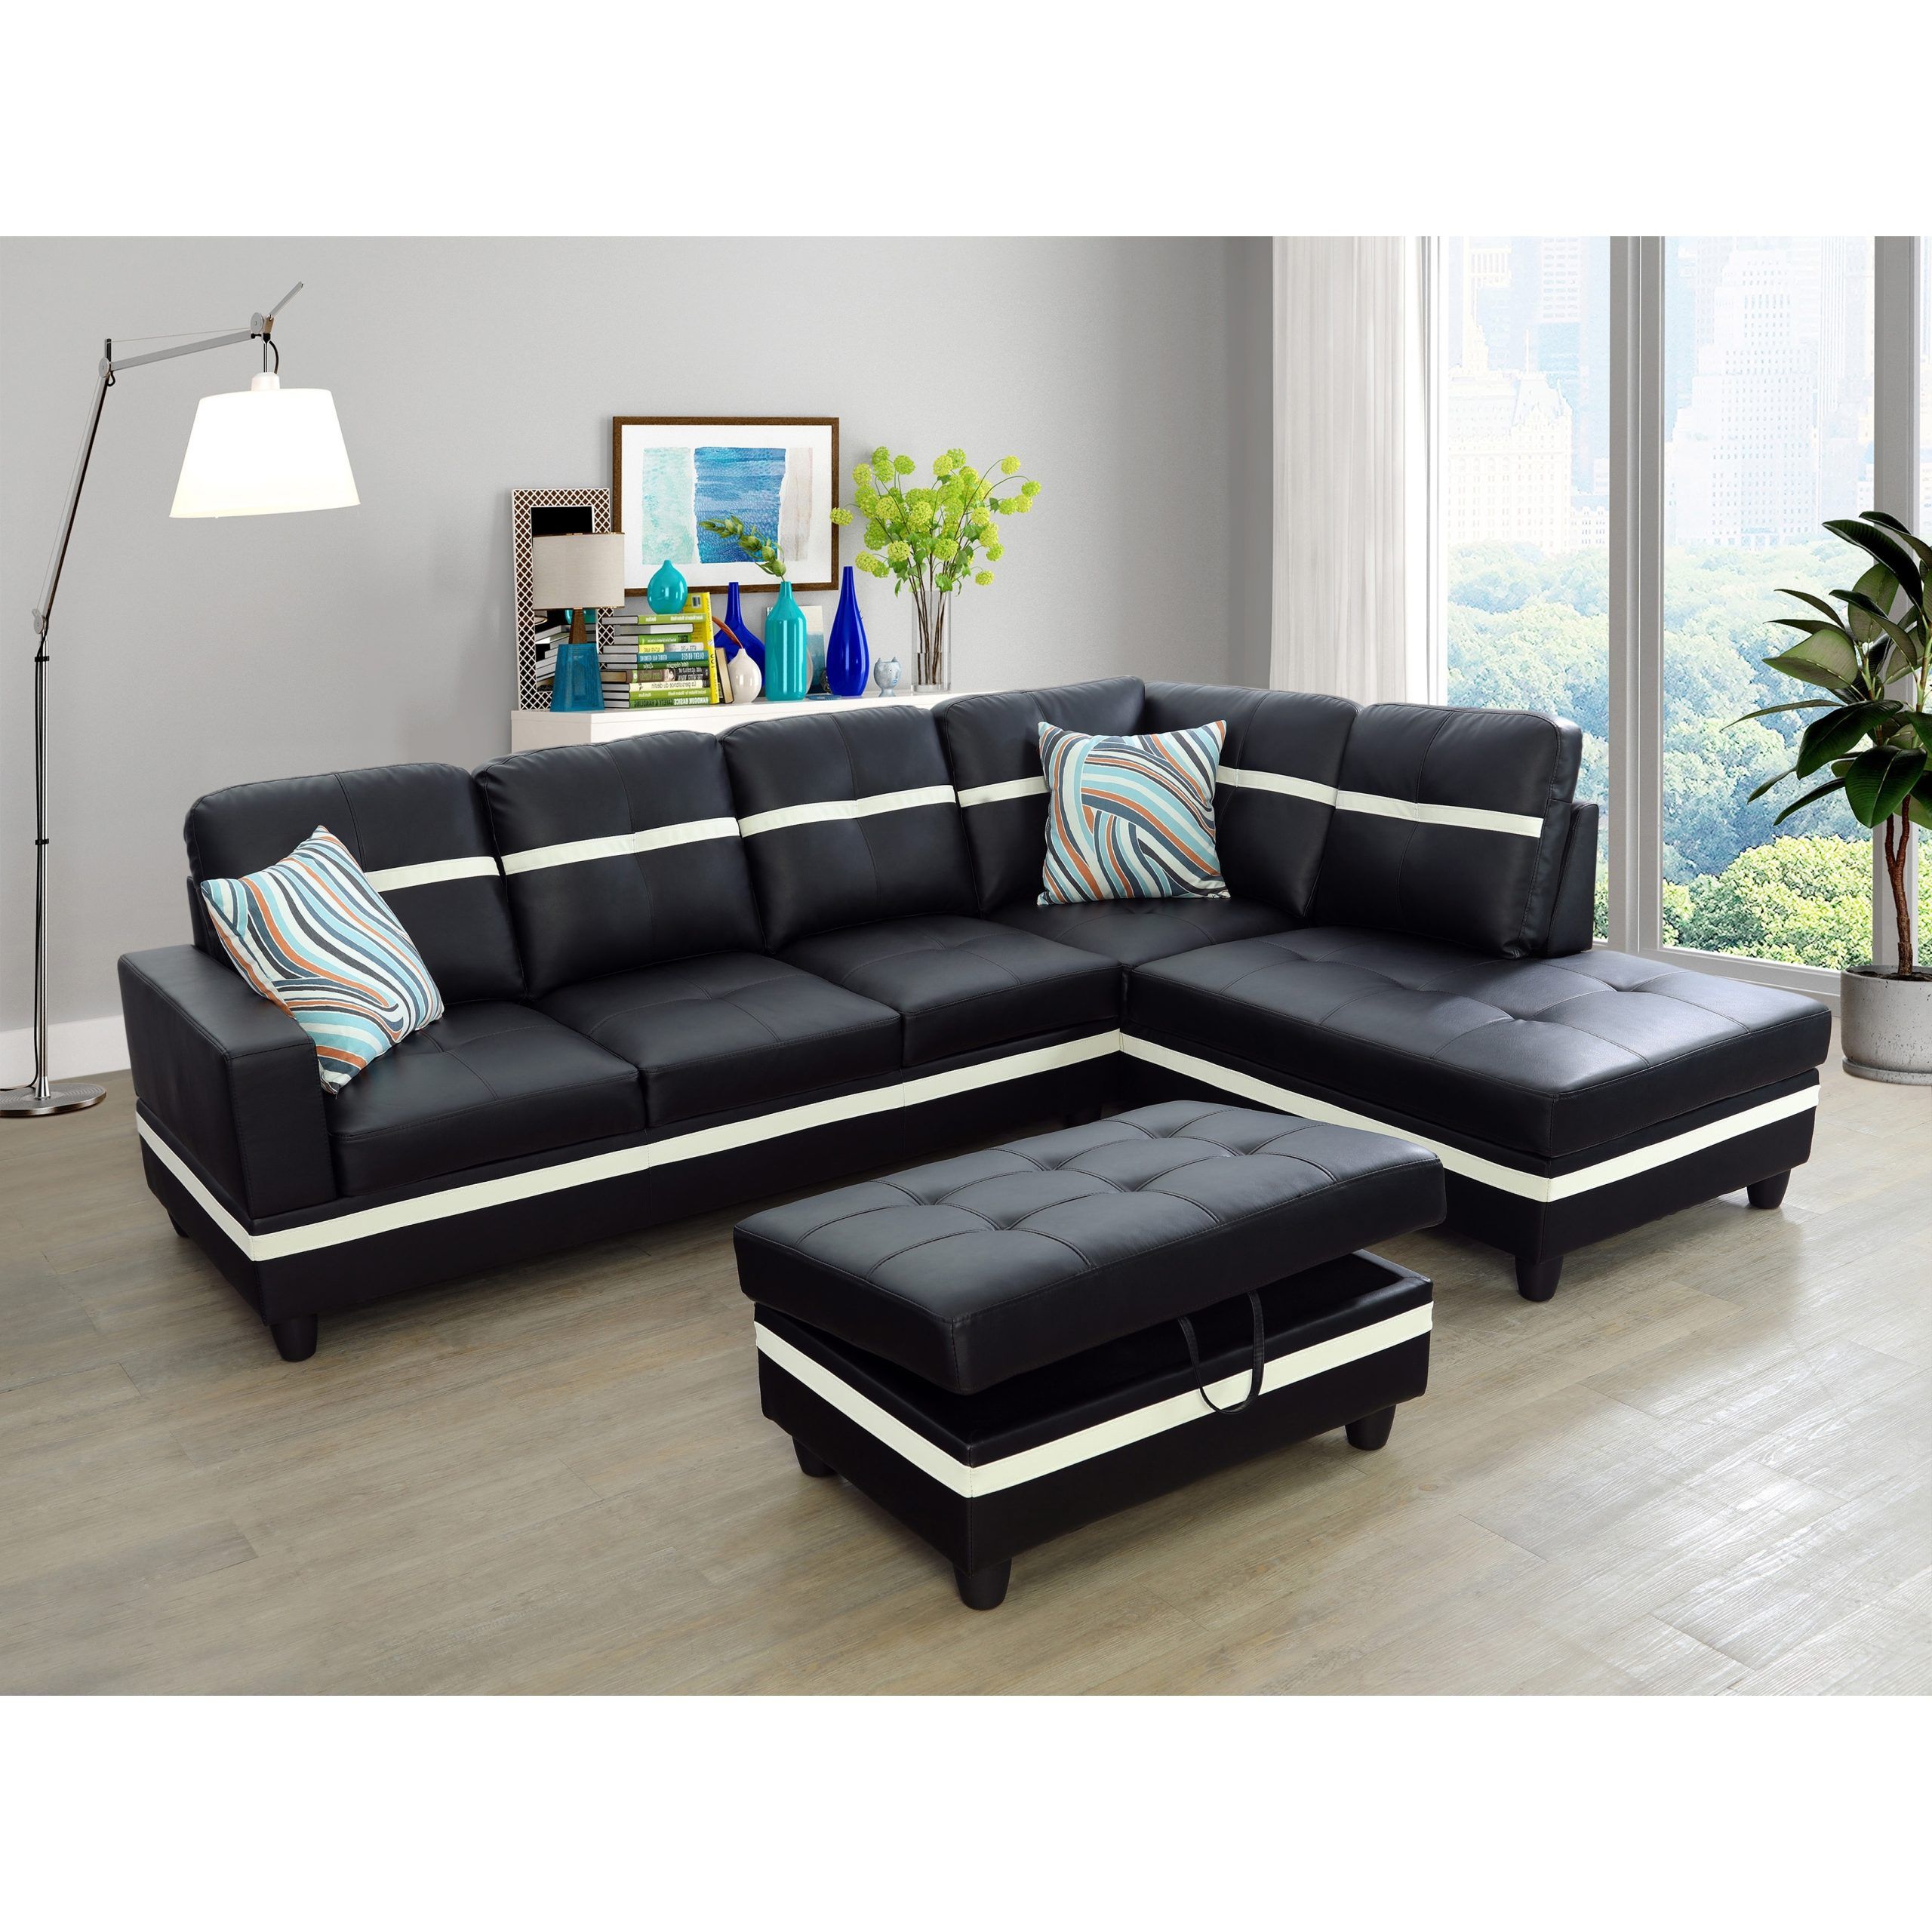 Black Right Facing 3 Piece Sectional Sofa(9511b) – On Sale – Bed Bath &  Beyond – 33560690 For Right Facing Black Sofas (View 2 of 15)